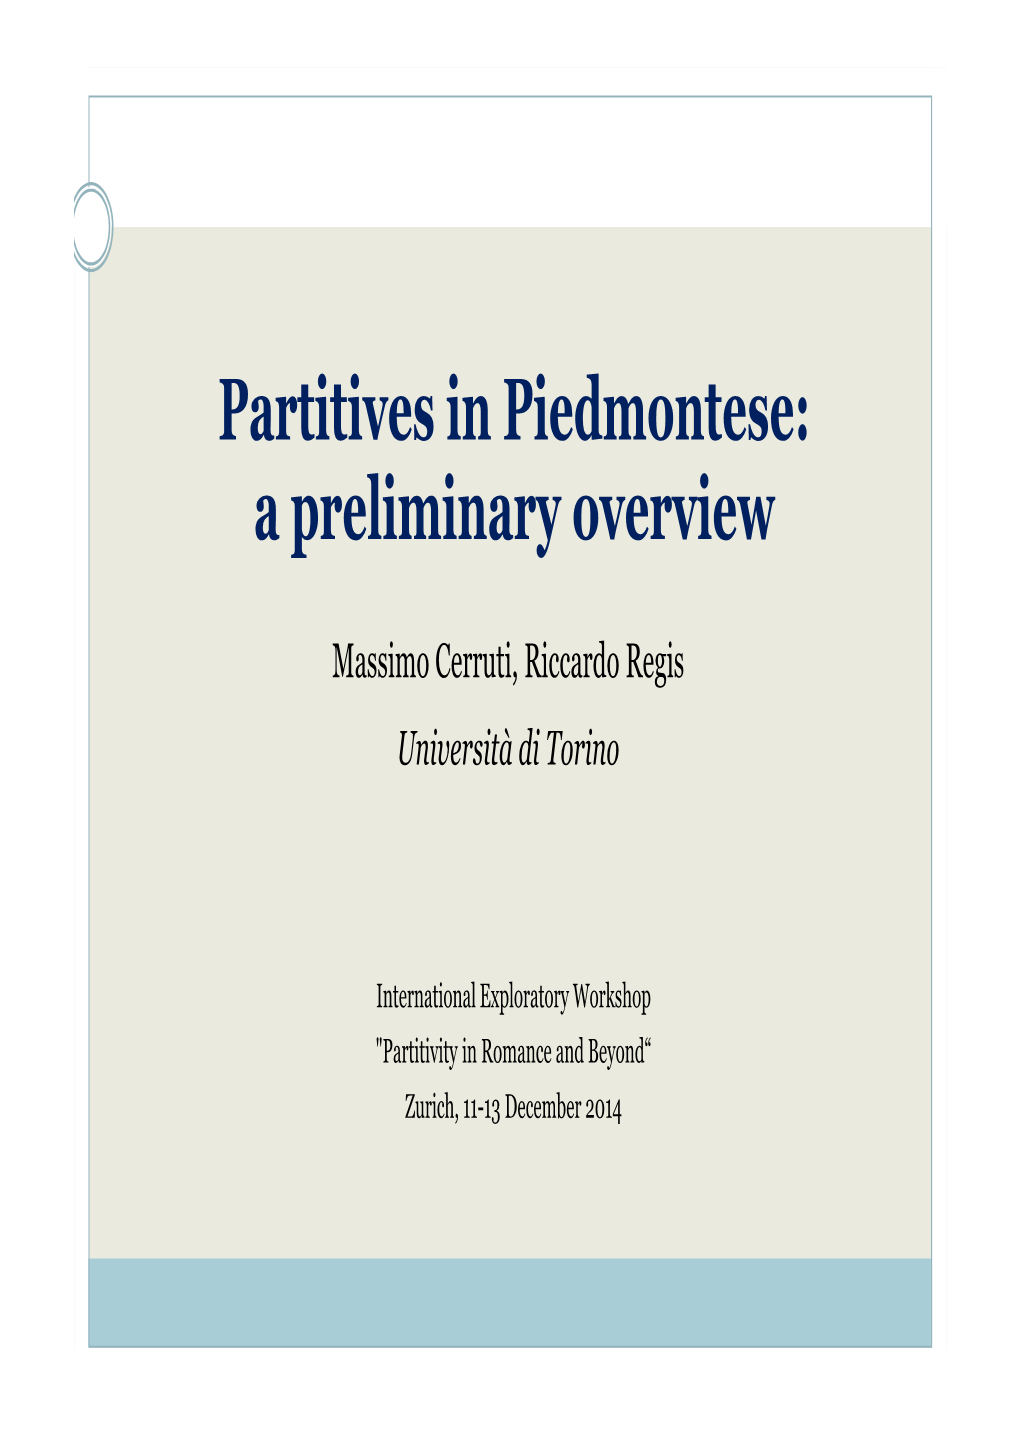 Partitives in Piedmontese: a Preliminary Overview